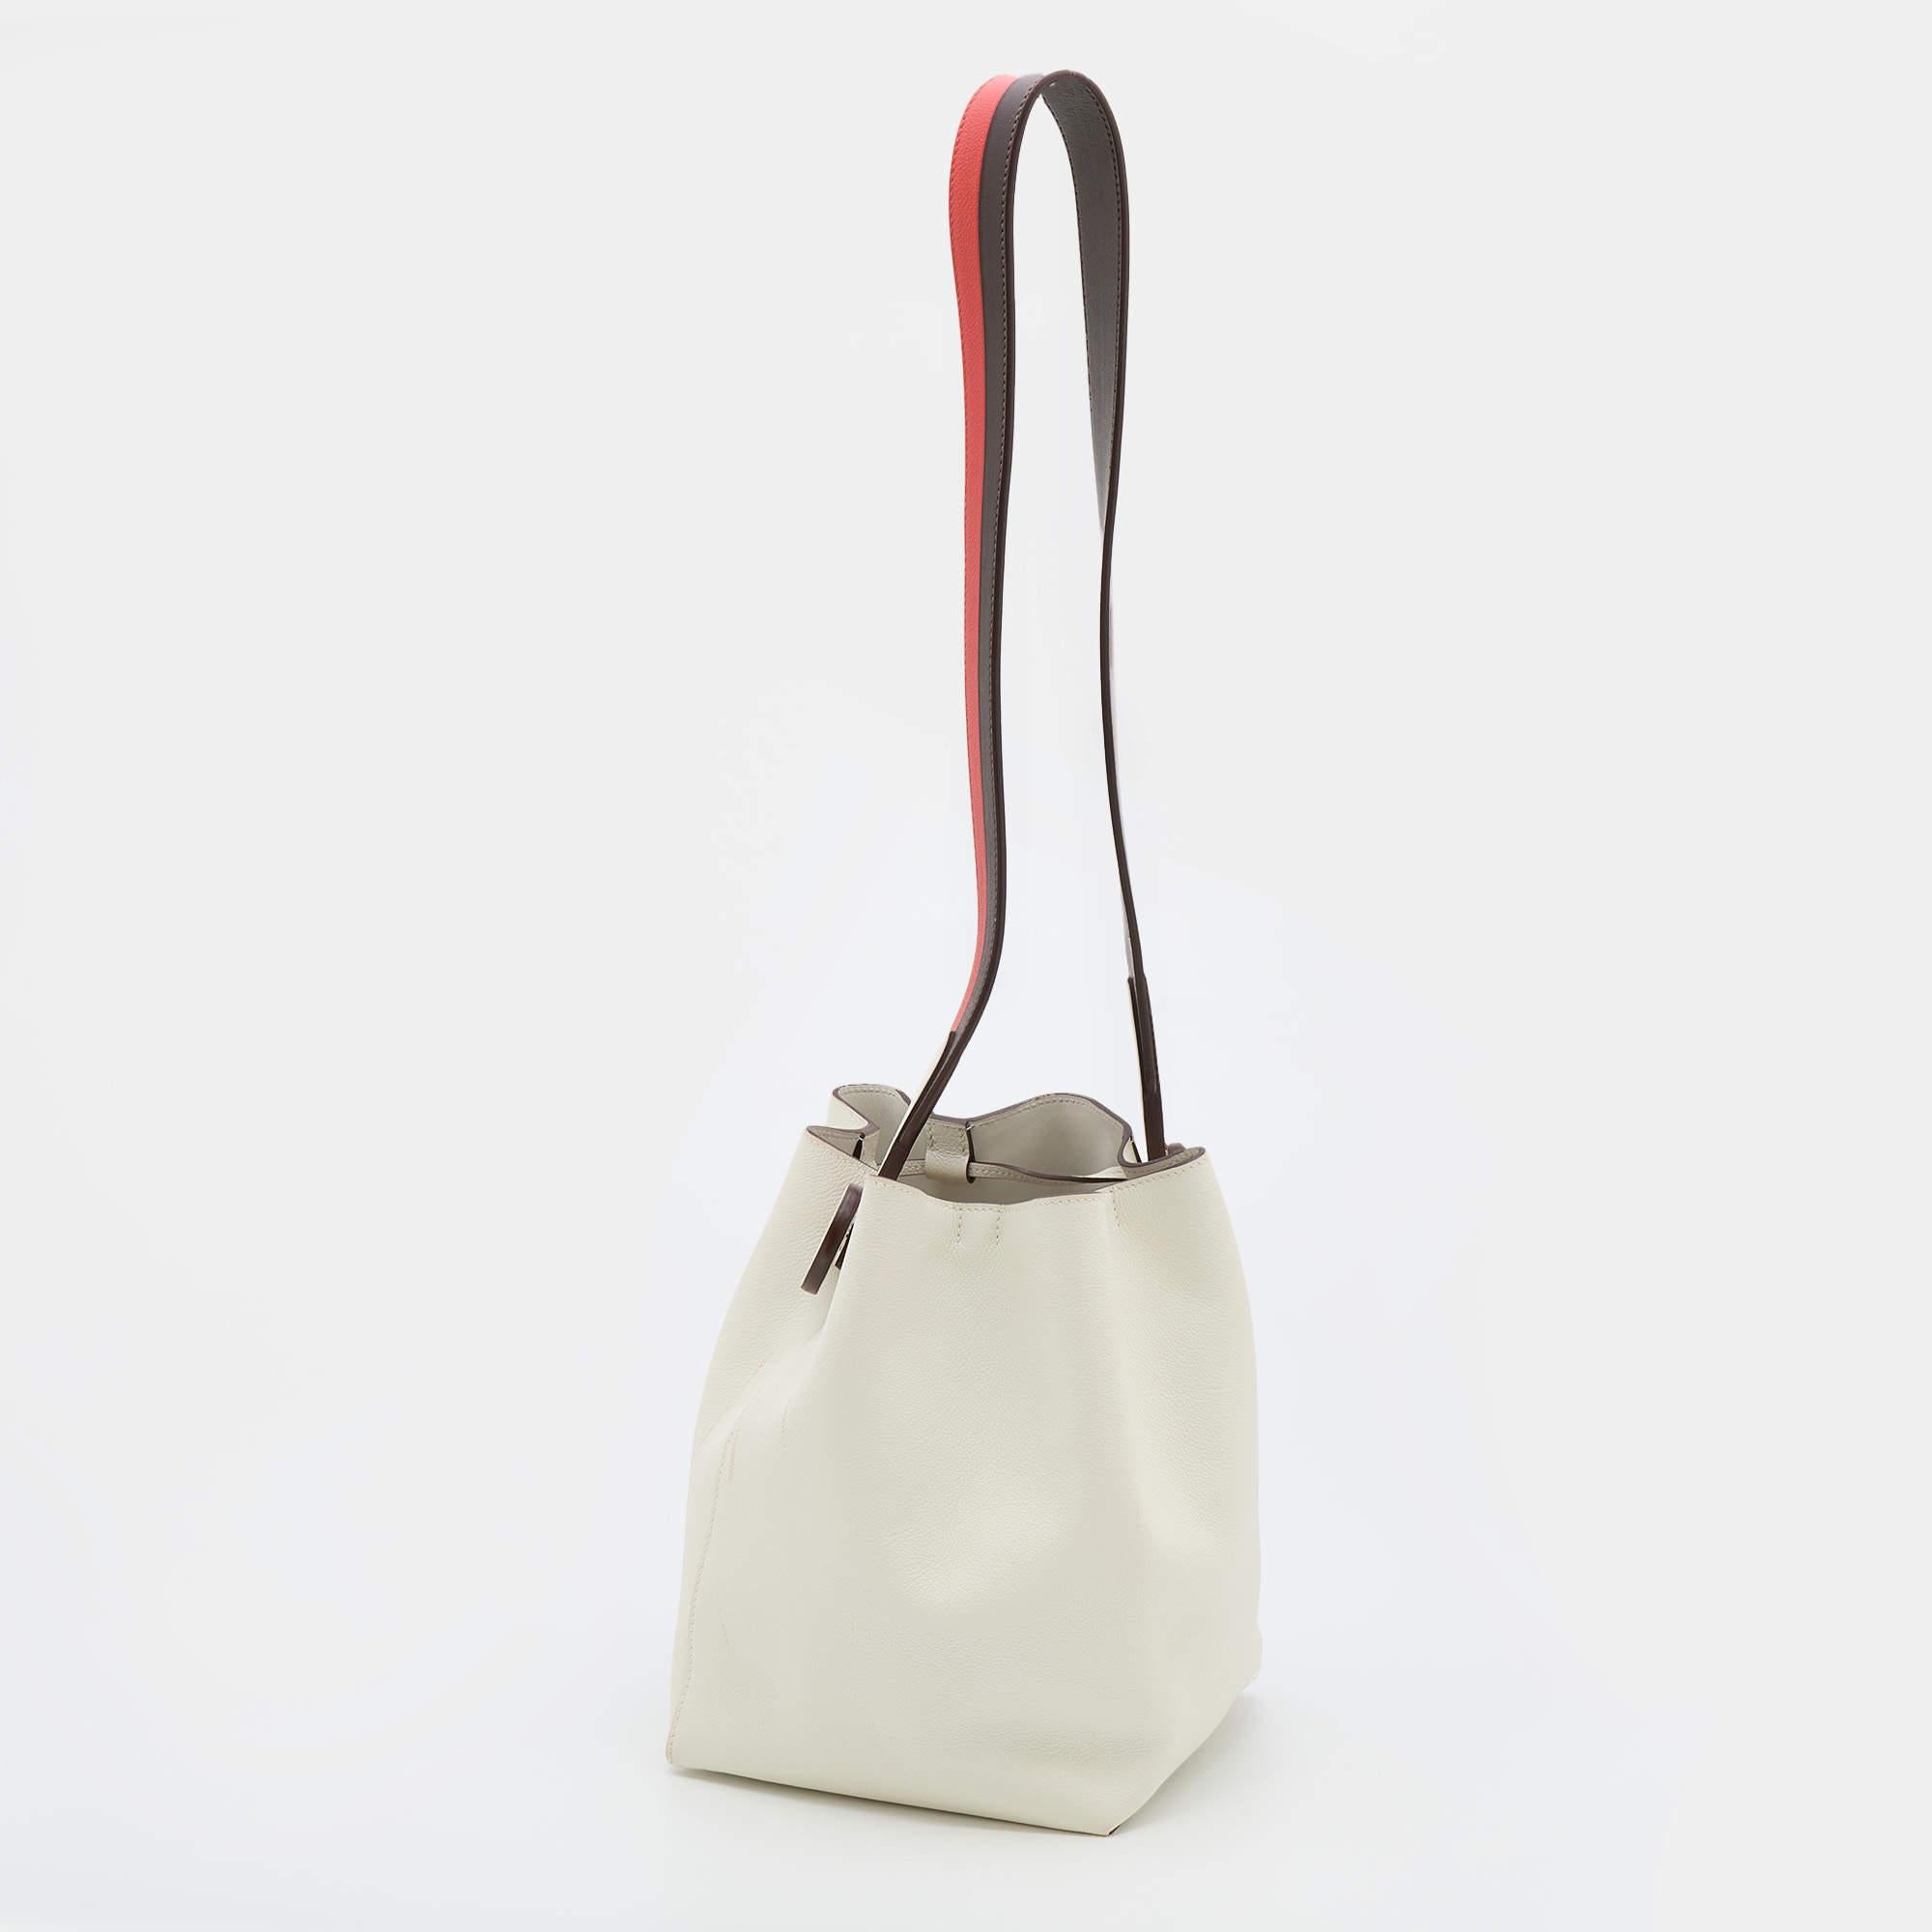 Crafted into an eye-catchy silhouette and style, this Licol bag from Hermes exudes just the right amount of charm and elegance! It is made from Craie Evercolor leather and is accentuated with a contrasting shoulder strap. It has a spacious